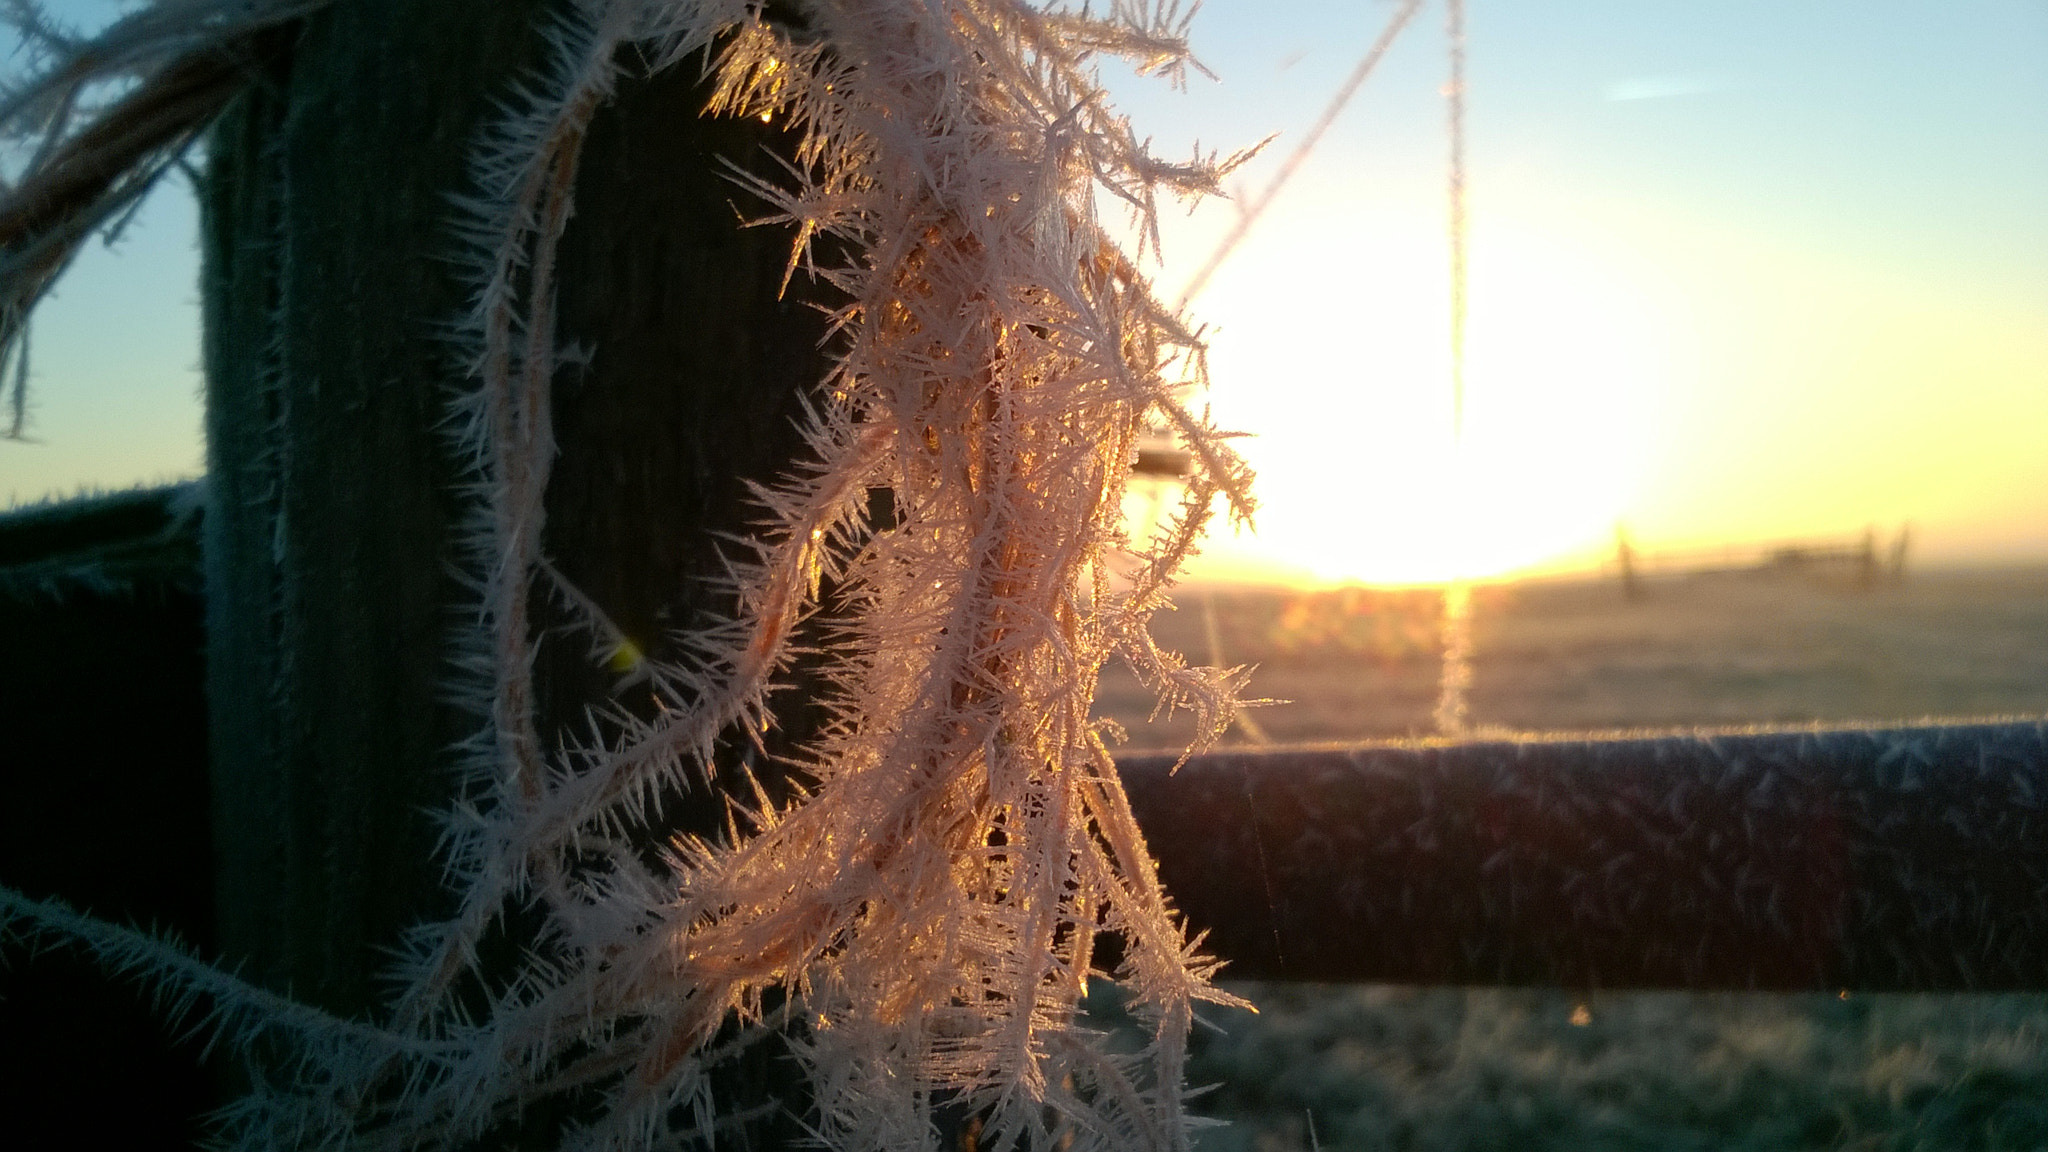 Nokia Lumia 735 sample photo. Frost on a rope on a january morning. photography